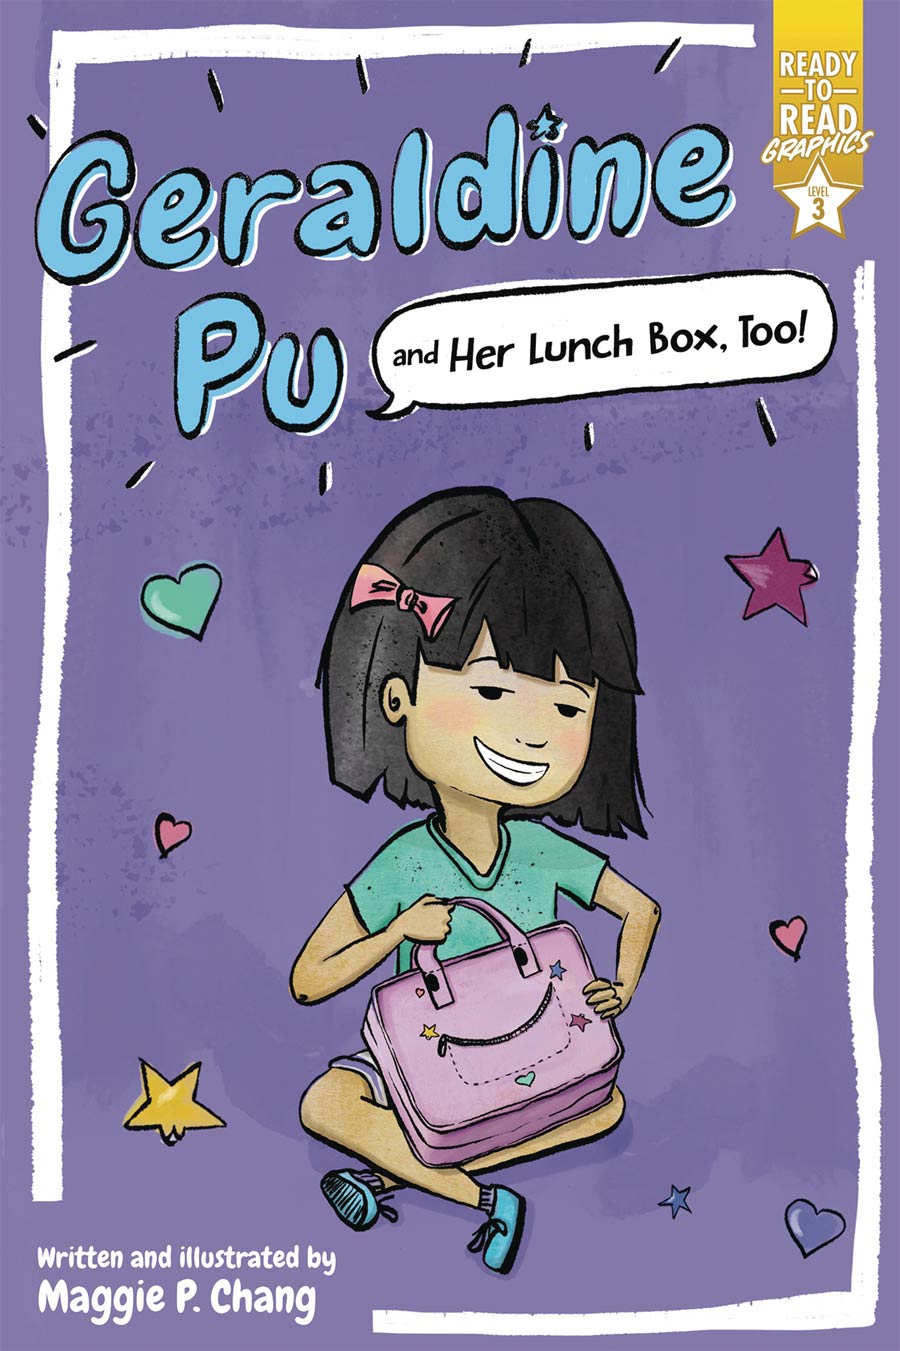 Geraldine Pu And Her Lunch Box Too TP